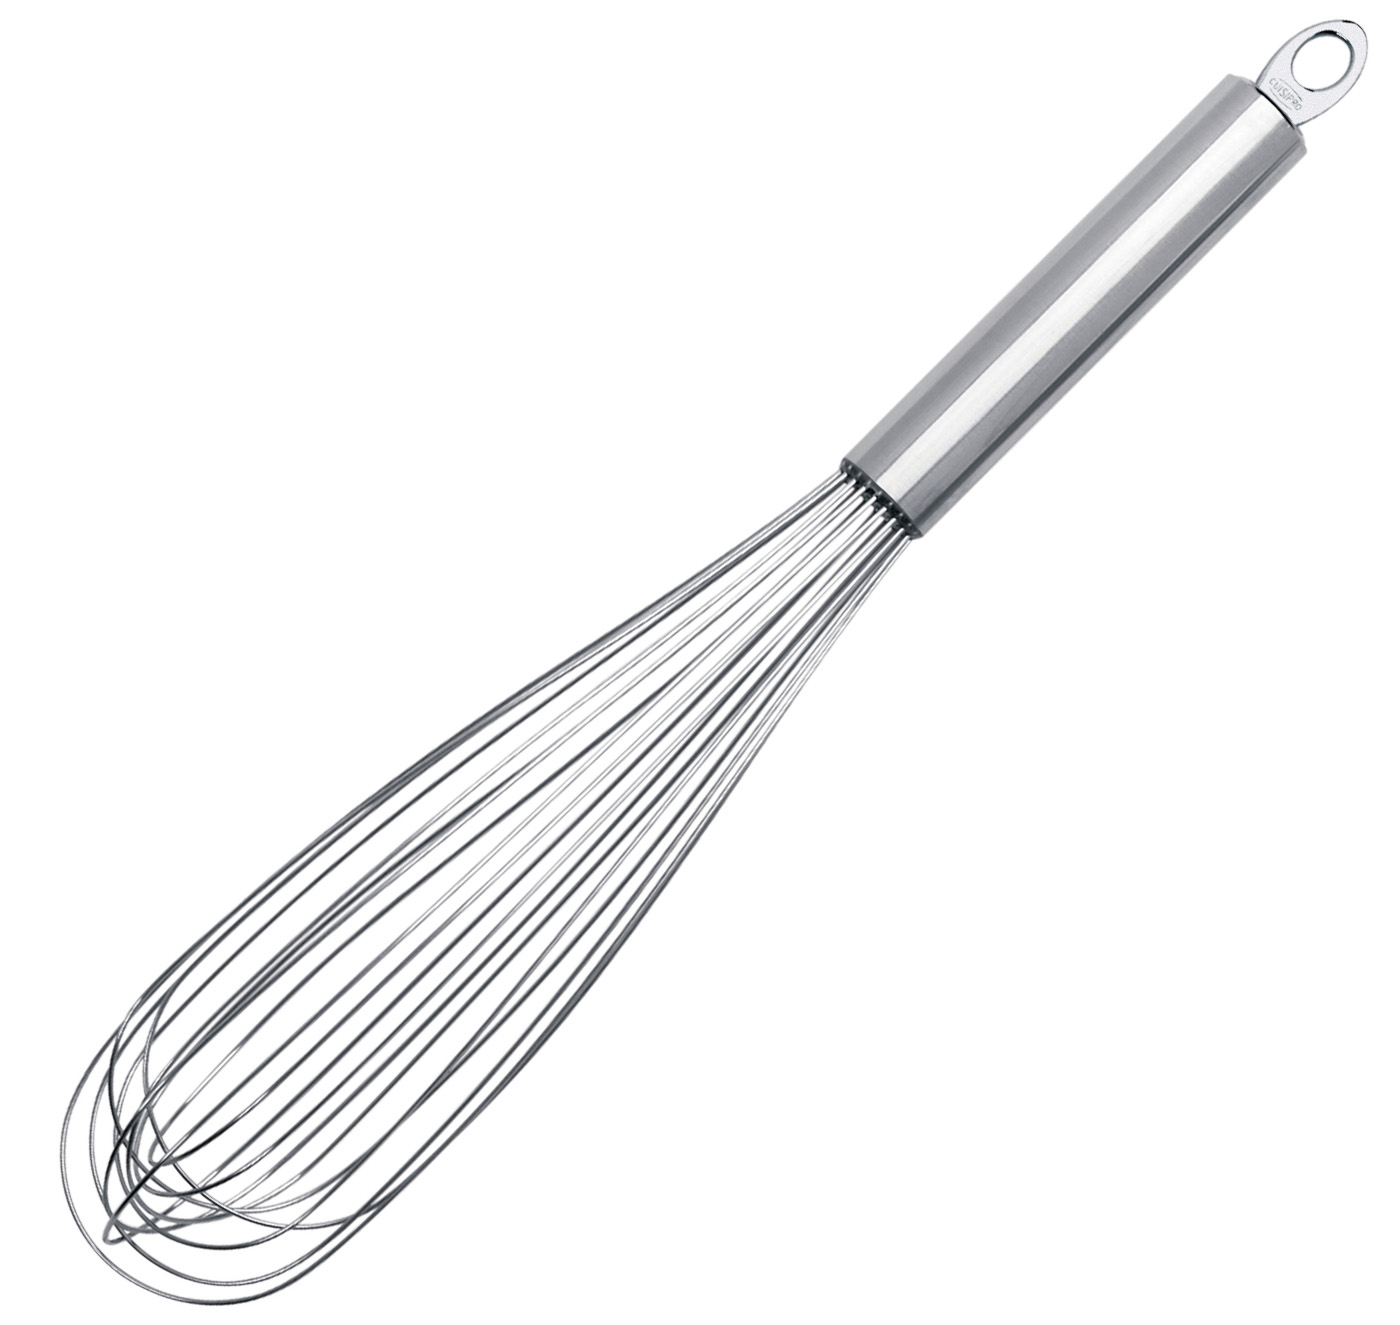 Cuisipro Solid Handle 10 Inch Egg Whisk, Stainless Steel - image 1 of 1